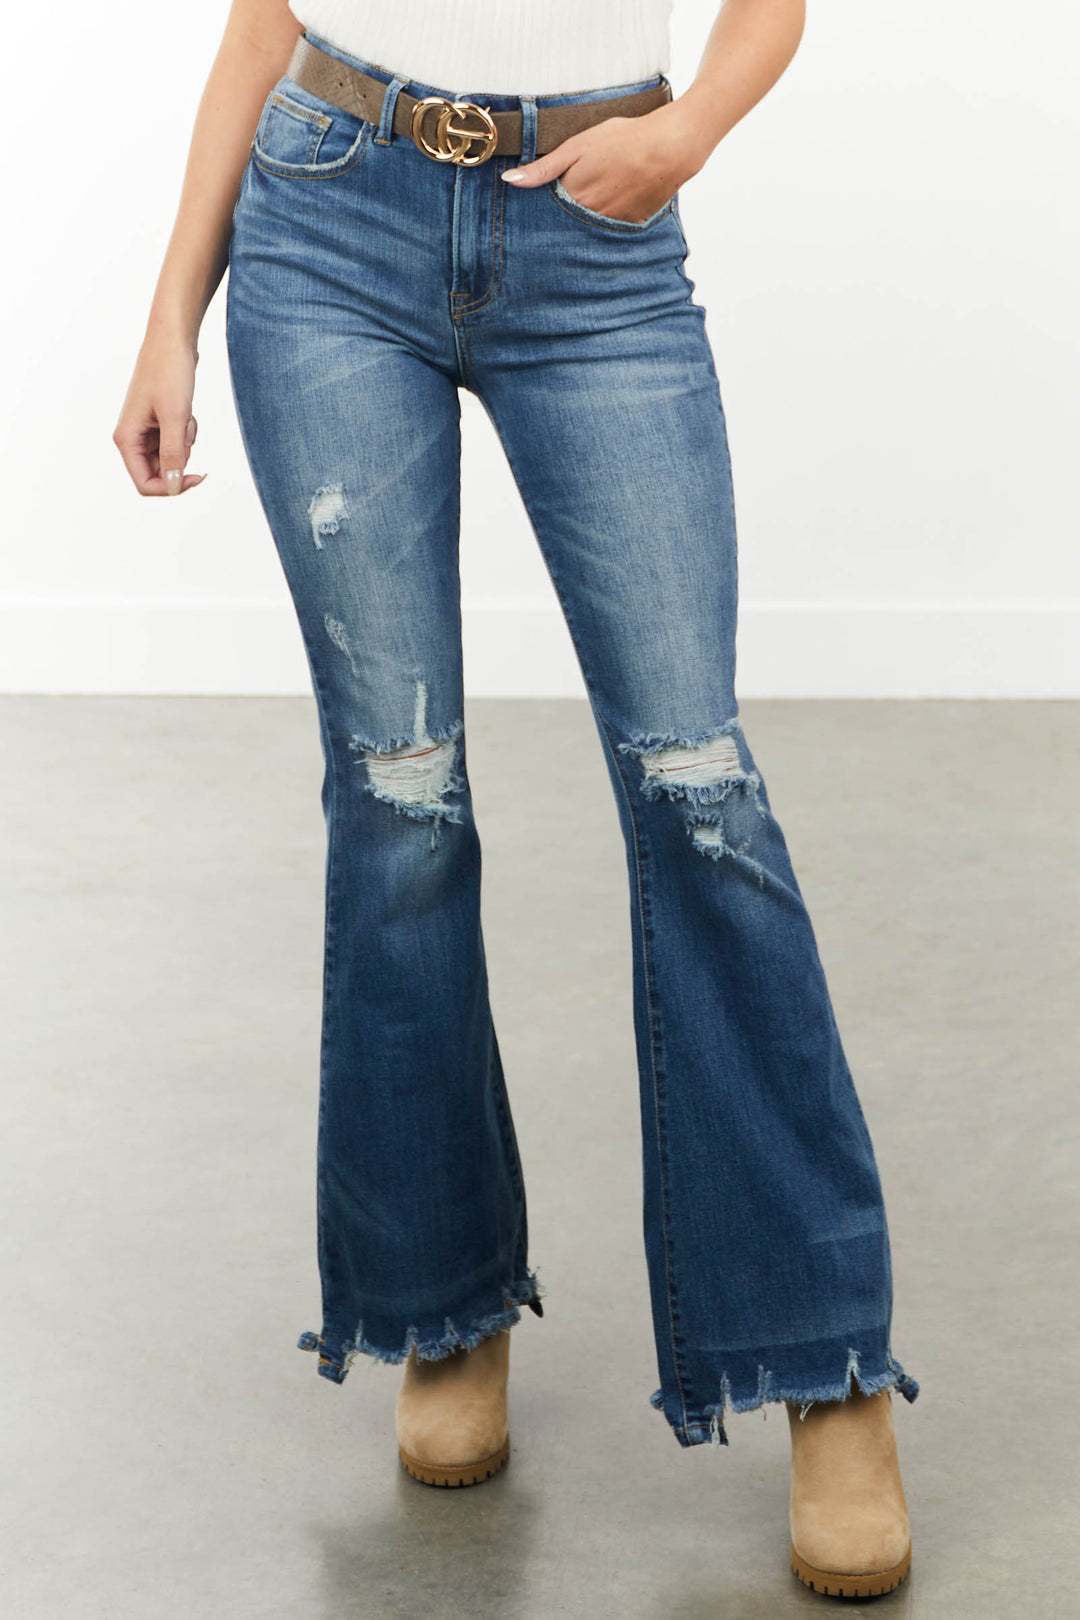 Special A Medium High Rise Flare Cut Distressed Jeans & Lime Lush